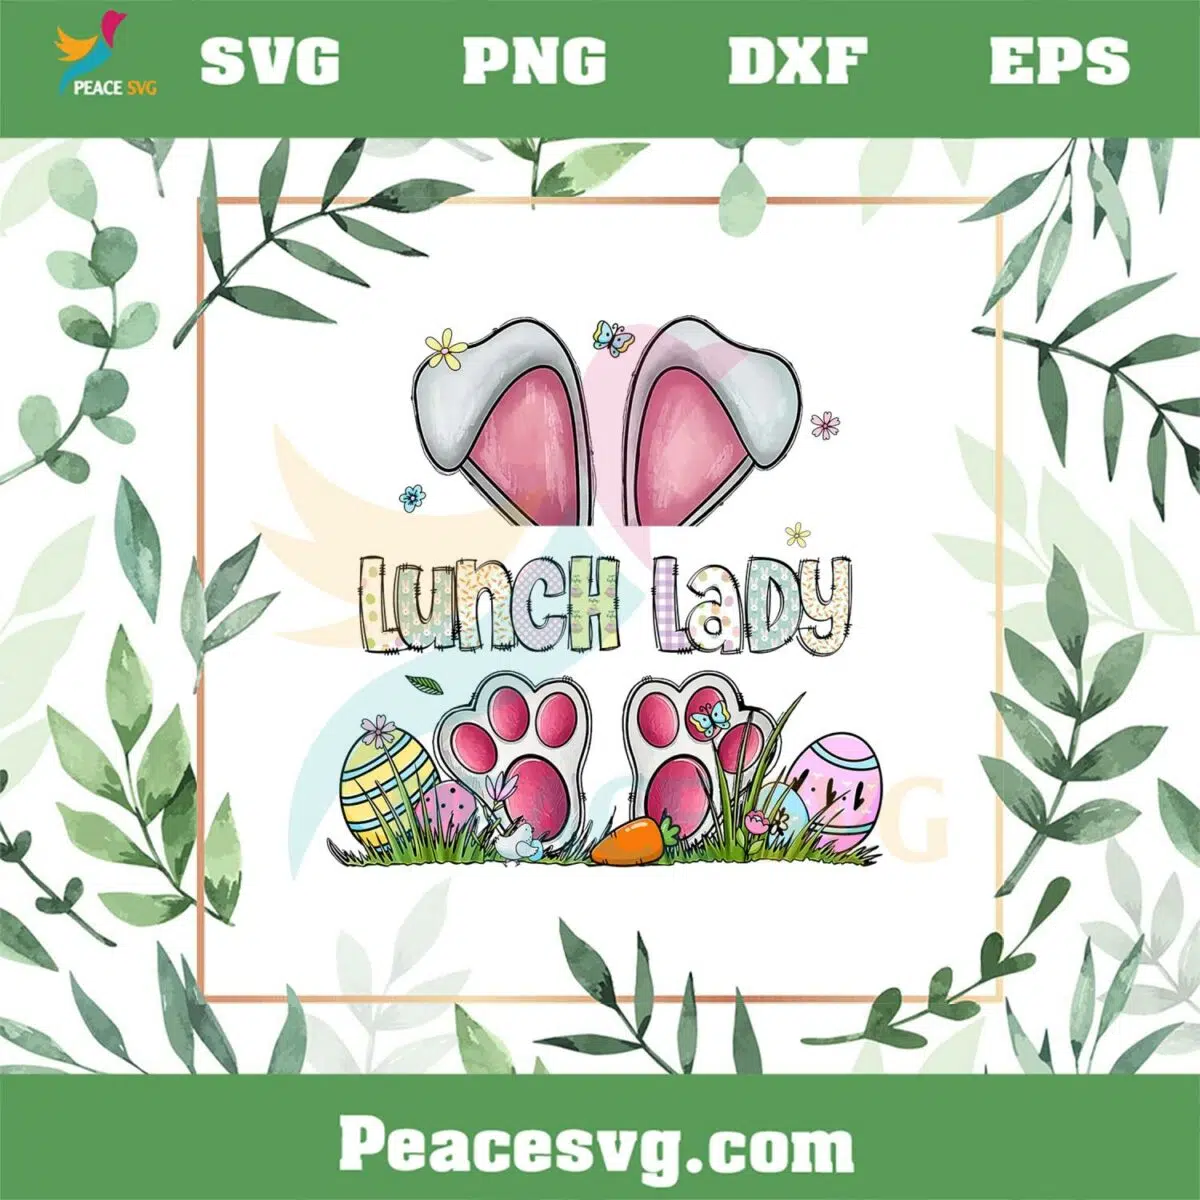 Cute Easter Lunch Lady Bunny Ear PNG Sublimation Designs